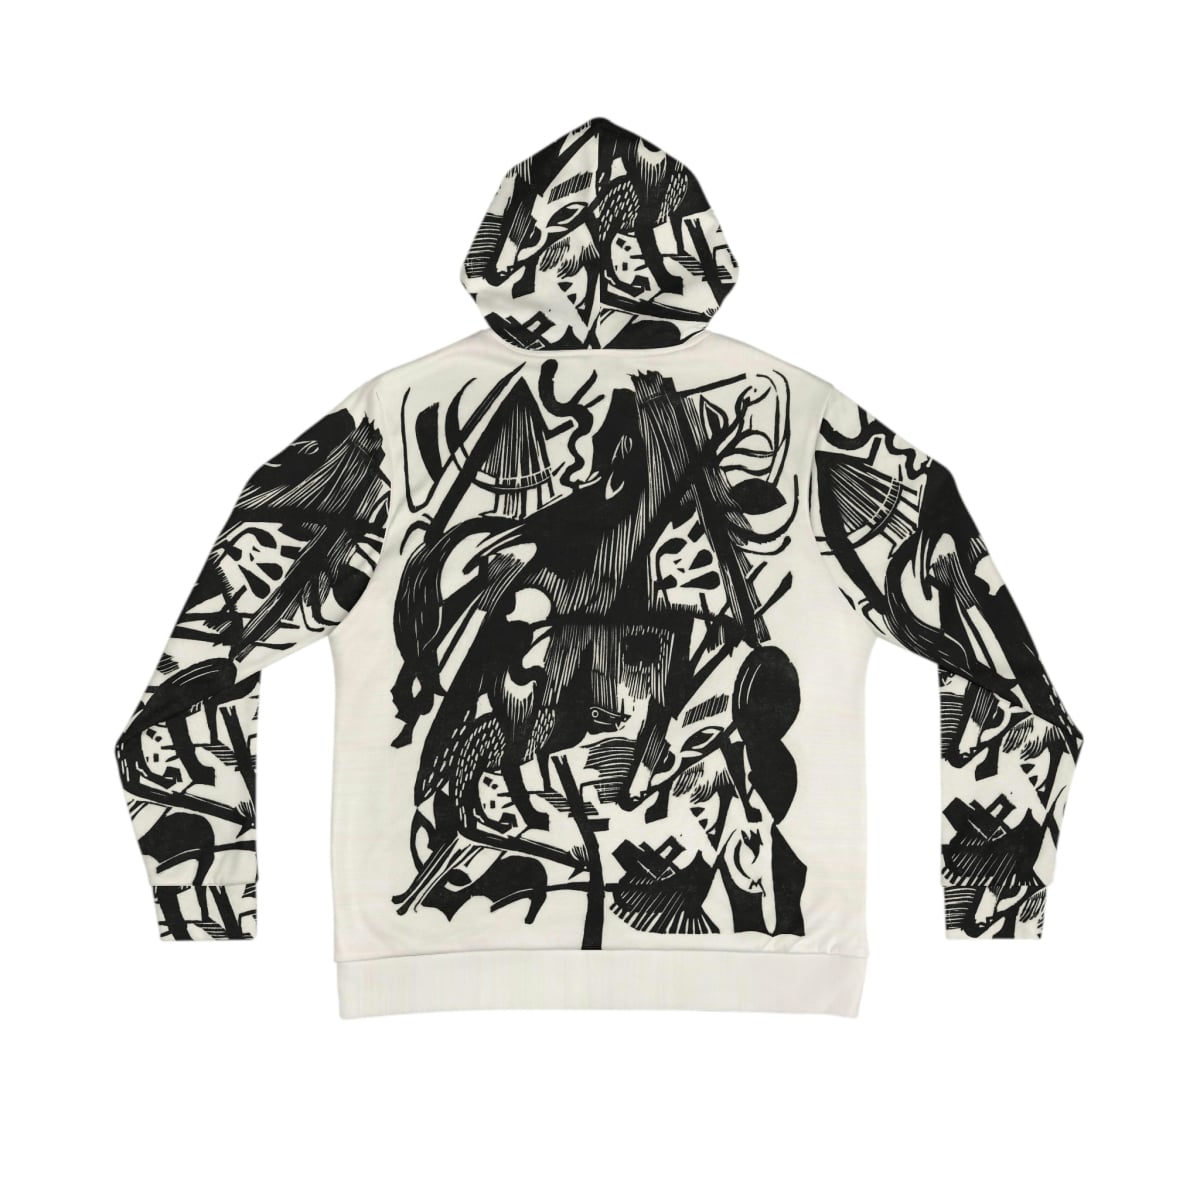 Birth of the Wolves by Franz Marc Hoodie